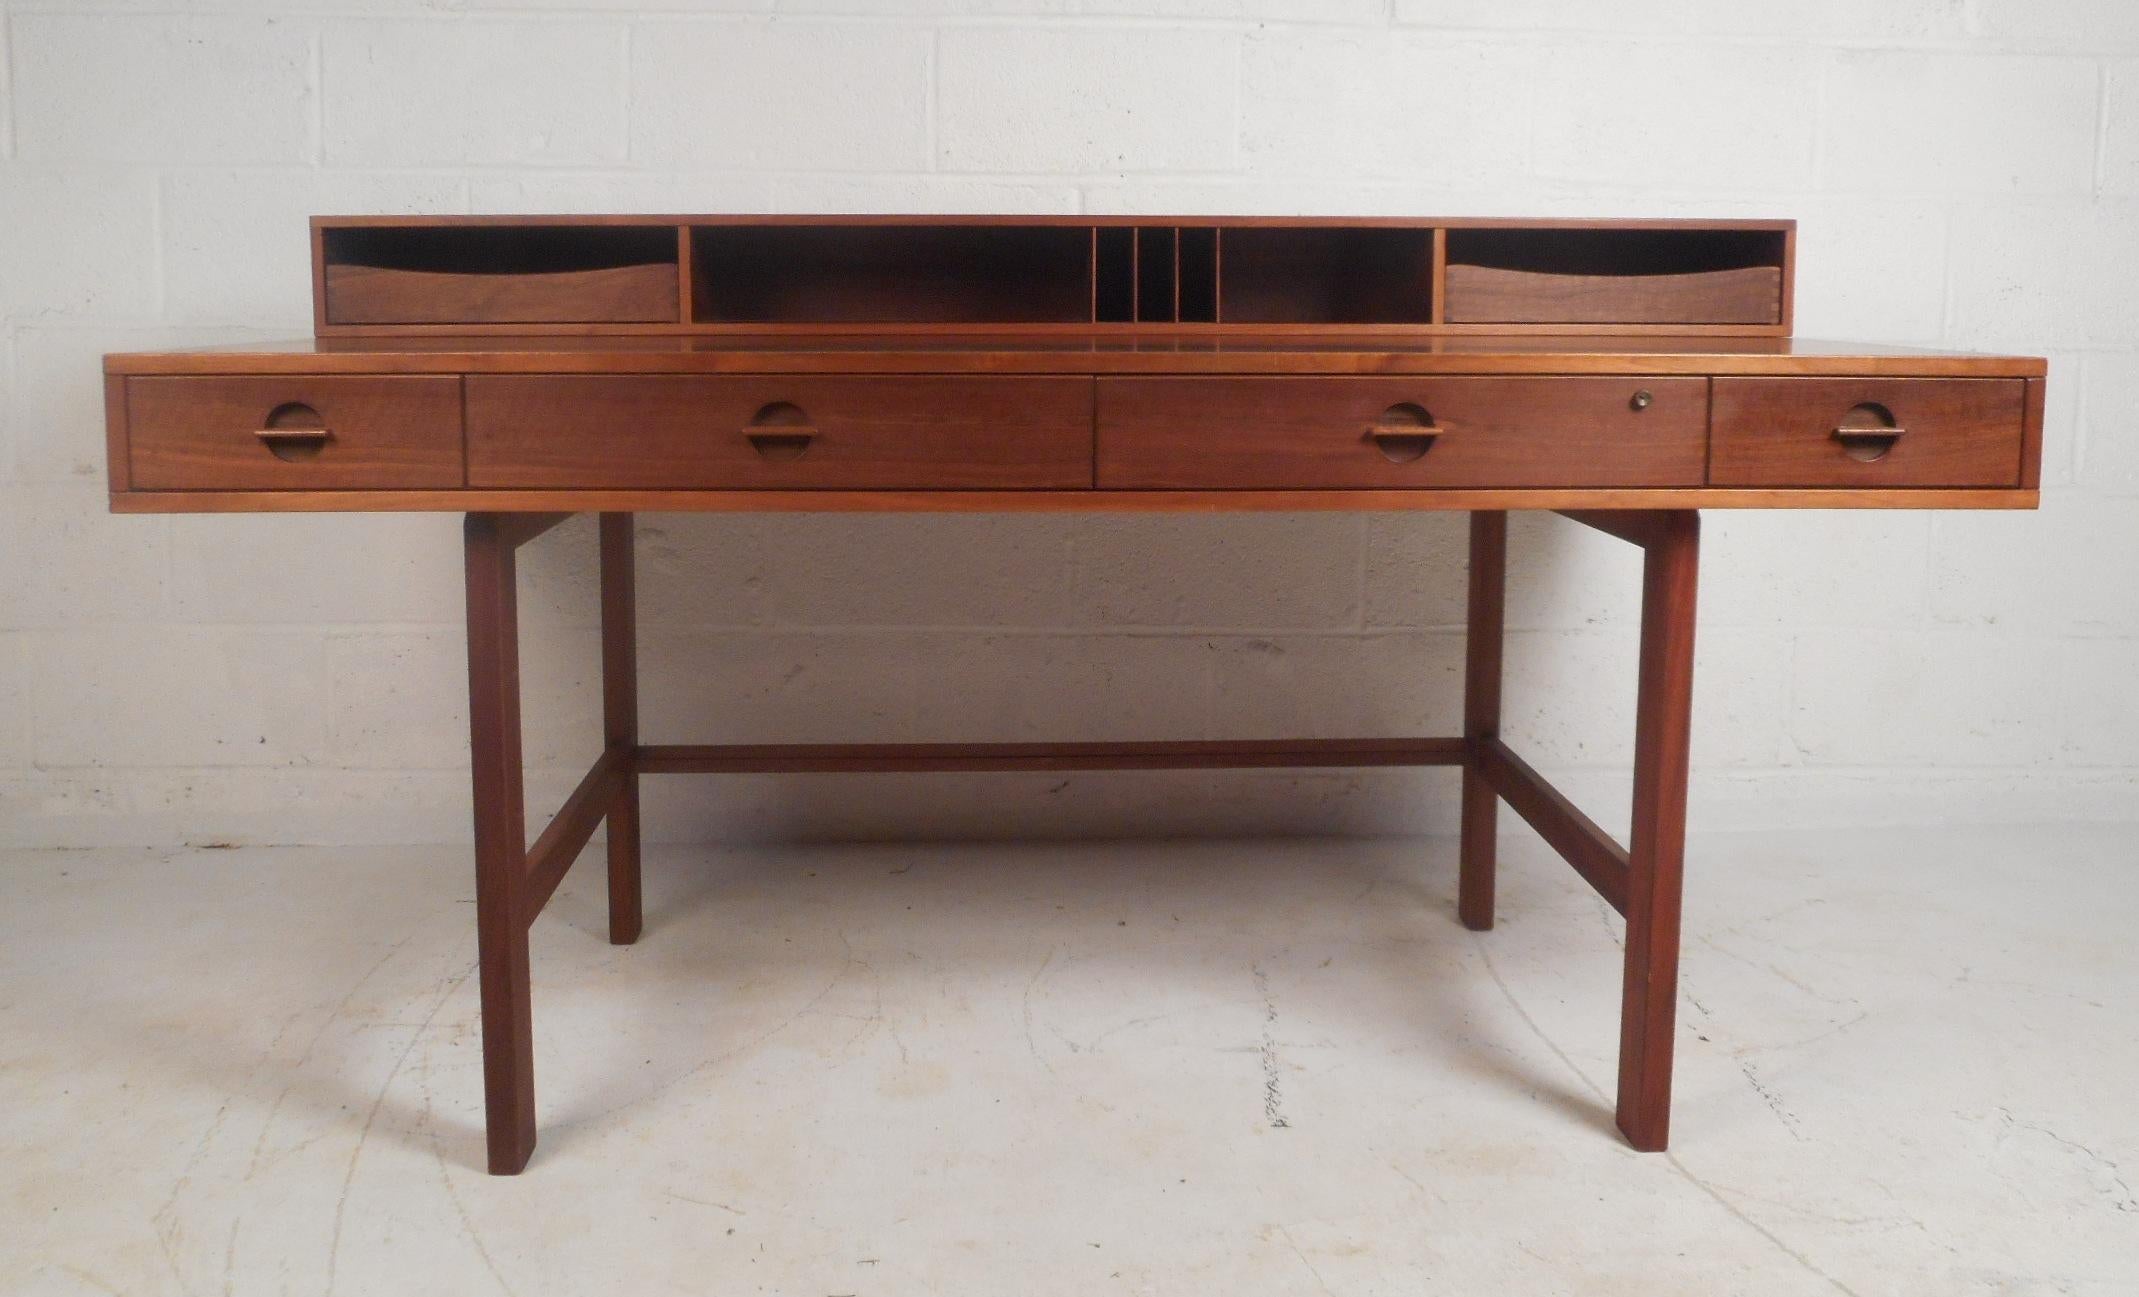 A wonderful midcentury case piece designed by Peter Løvig Nielsen in walnut. This handsome desk features recessed carved drawer pulls and stretchers along the base for added sturdiness. A clever design with a shelf that flips down creating a larger